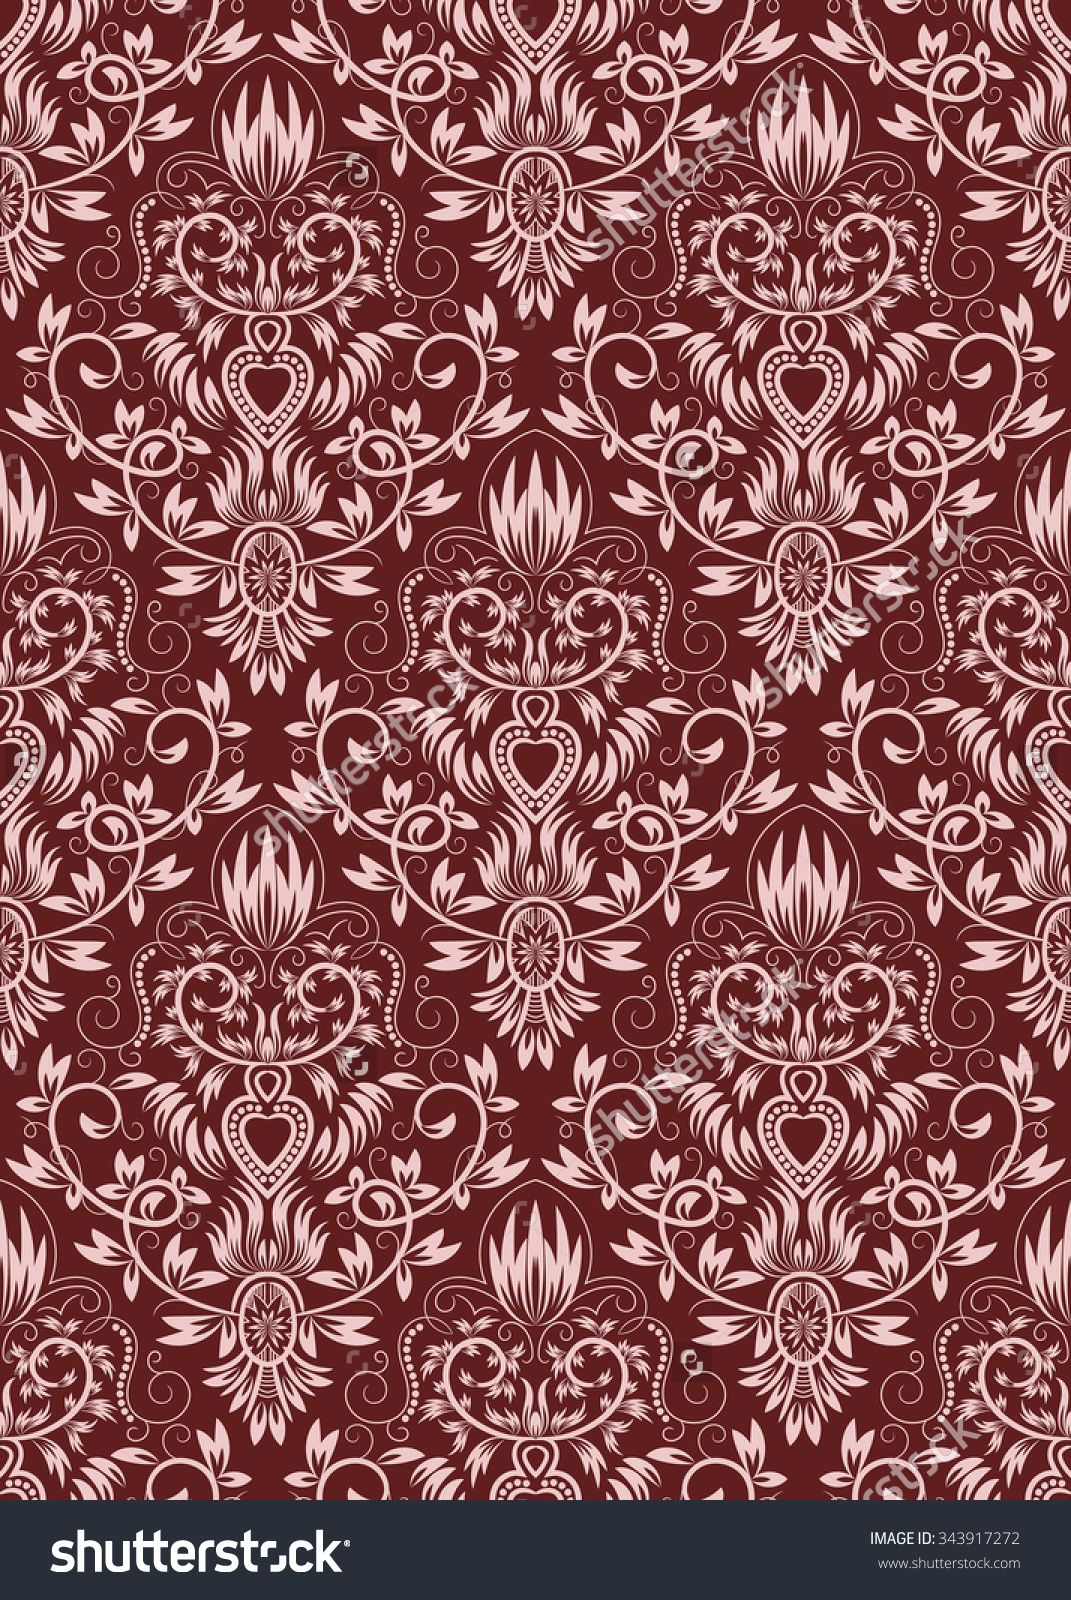 Damask Seamless Pattern Repeating Background Burgundy Floral